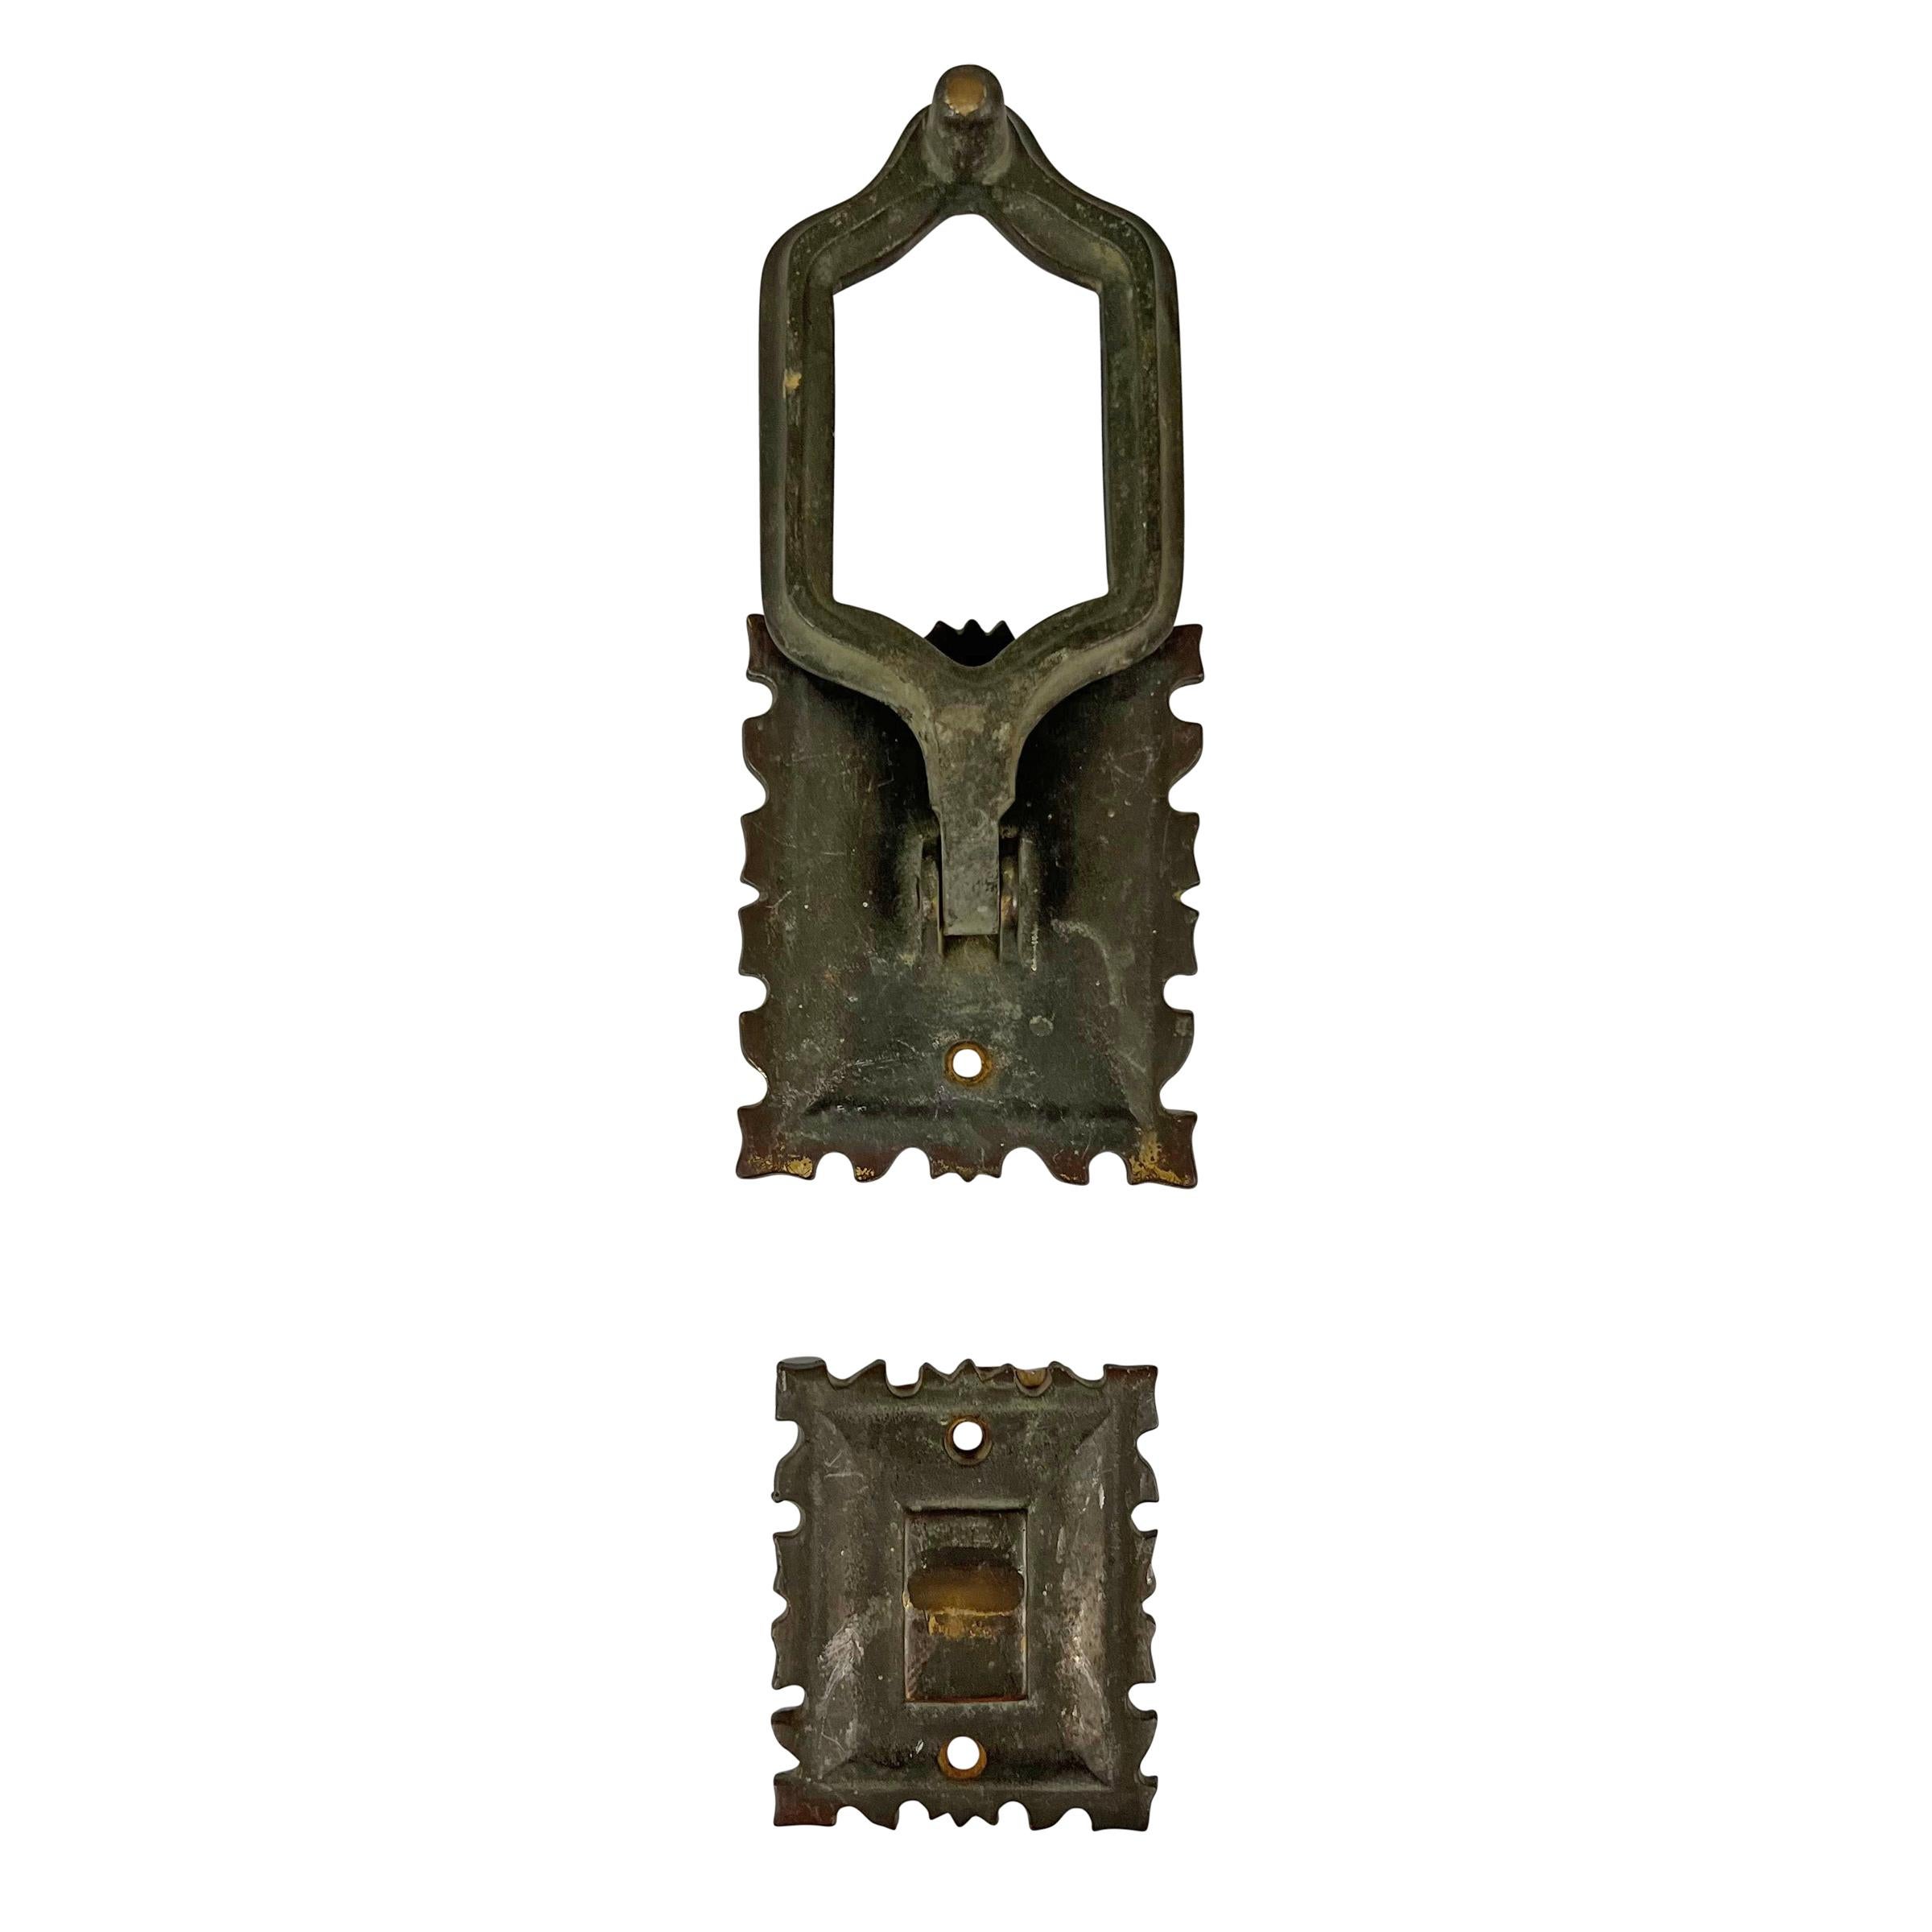 Early 20th Century American Arts and Crafts Doorknocker 1